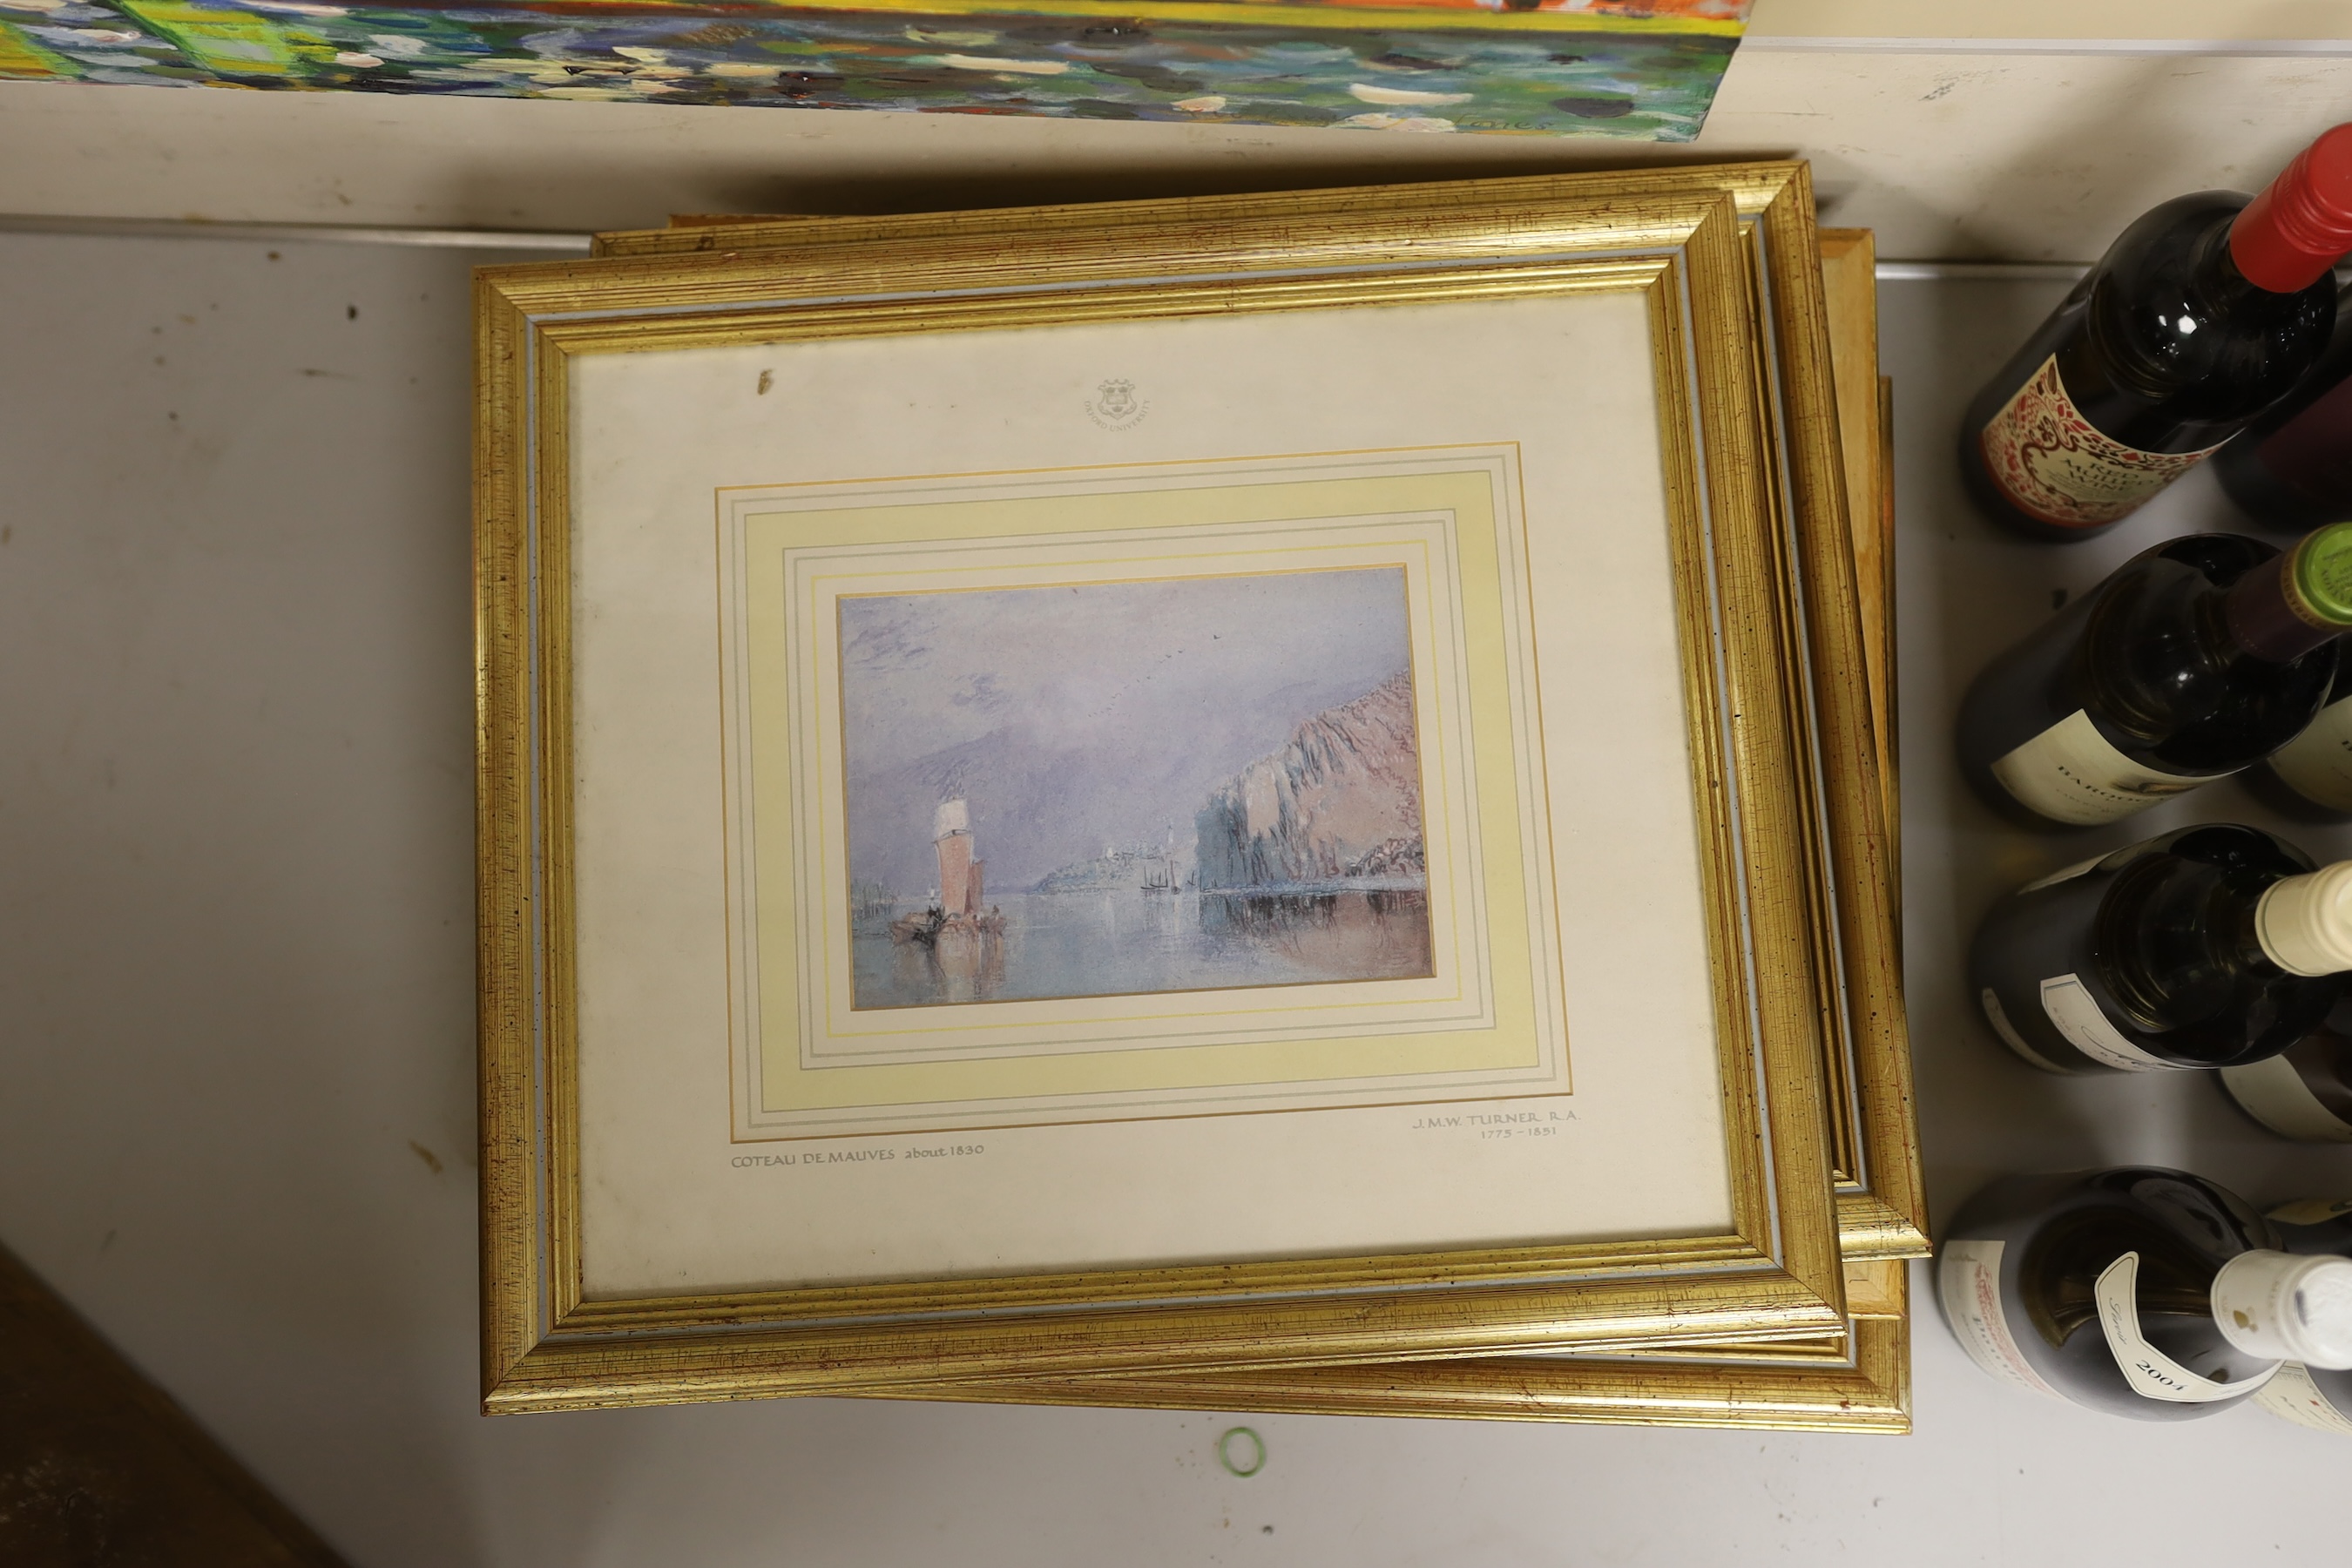 After J M W Turner, six colour prints, Famous landscapes with COA's from the Ashmolian Museum edition, 14 x 19cm